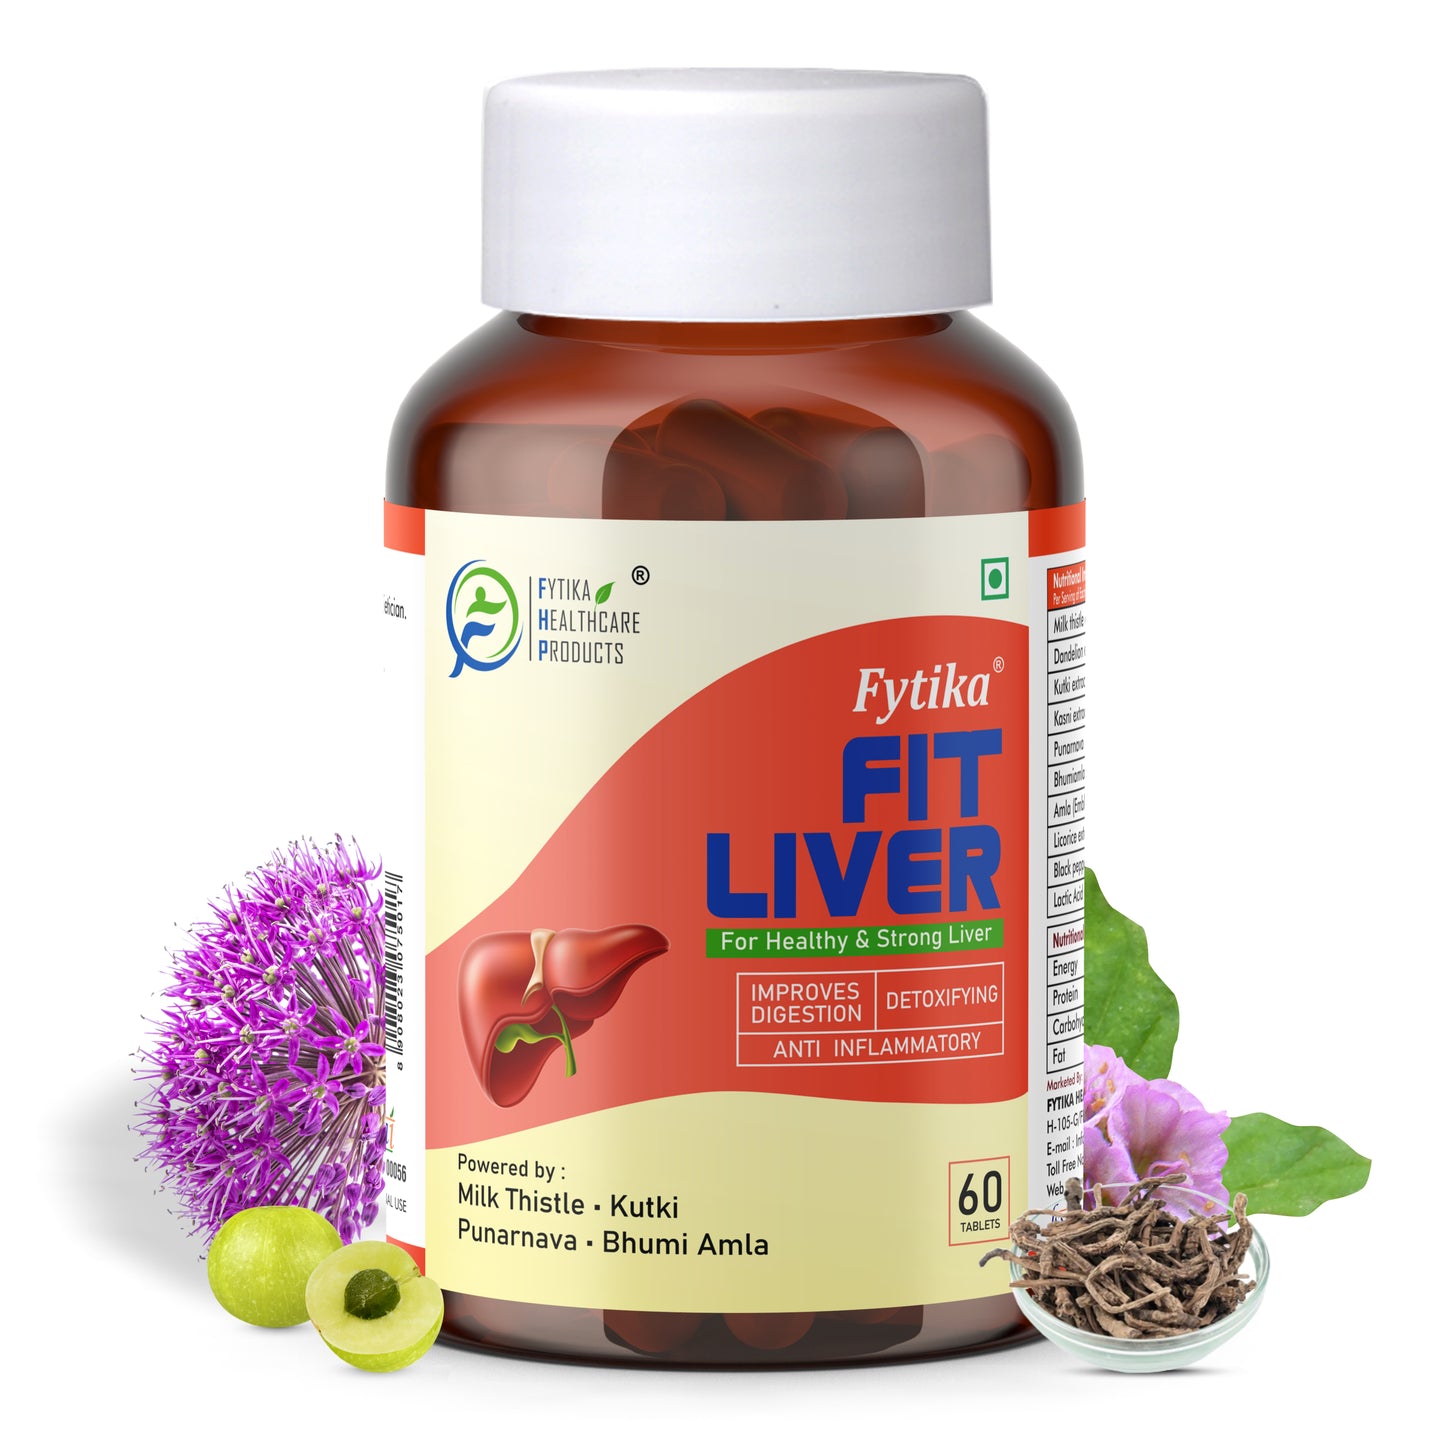 Get FREE Fytika Fit Liver with Fytika Omega 1000